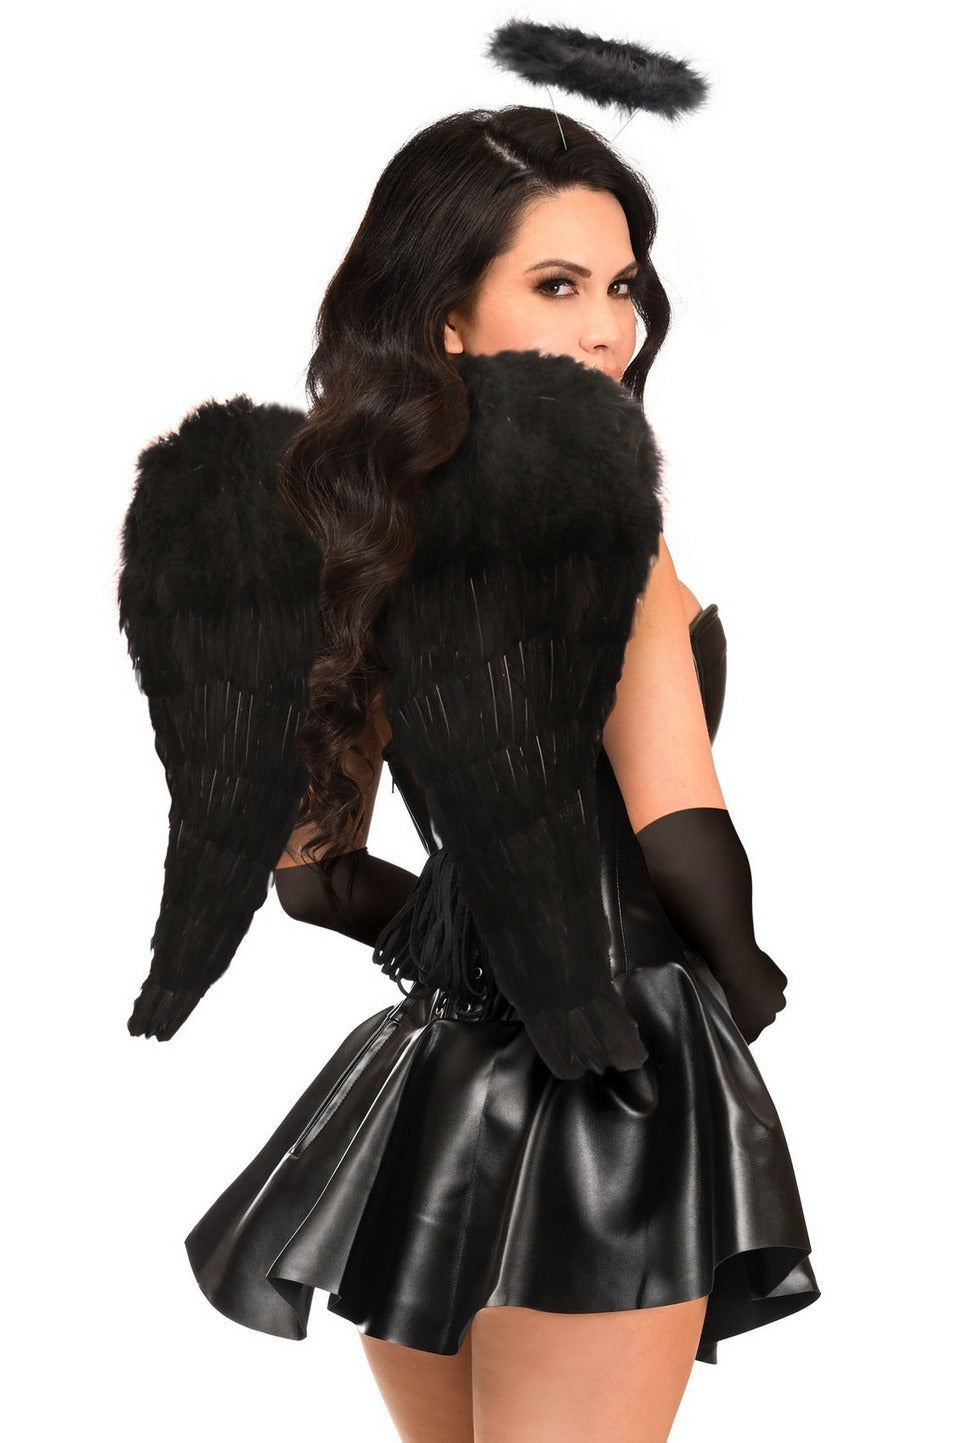 Top Drawer 4 PC Faux Leather Dark Angel Corset Dress Costume-Daisy Corsets